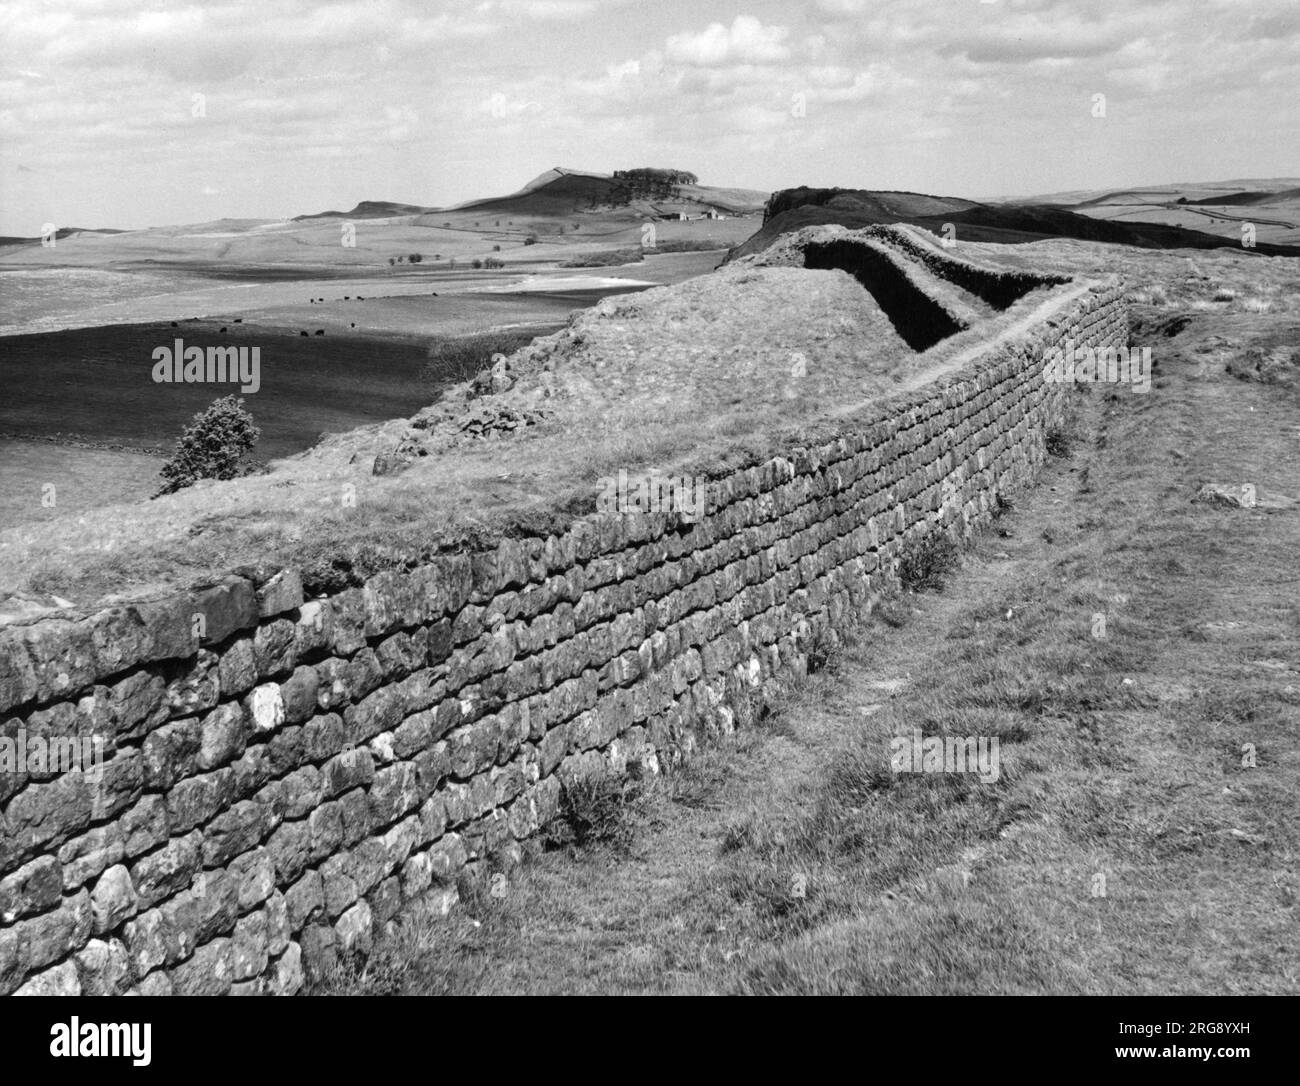 Close-up view of a well-preserved section of Hadrian's Wall, near Peel Crag. This part of the wall is particularly popular with walkers. Stock Photo